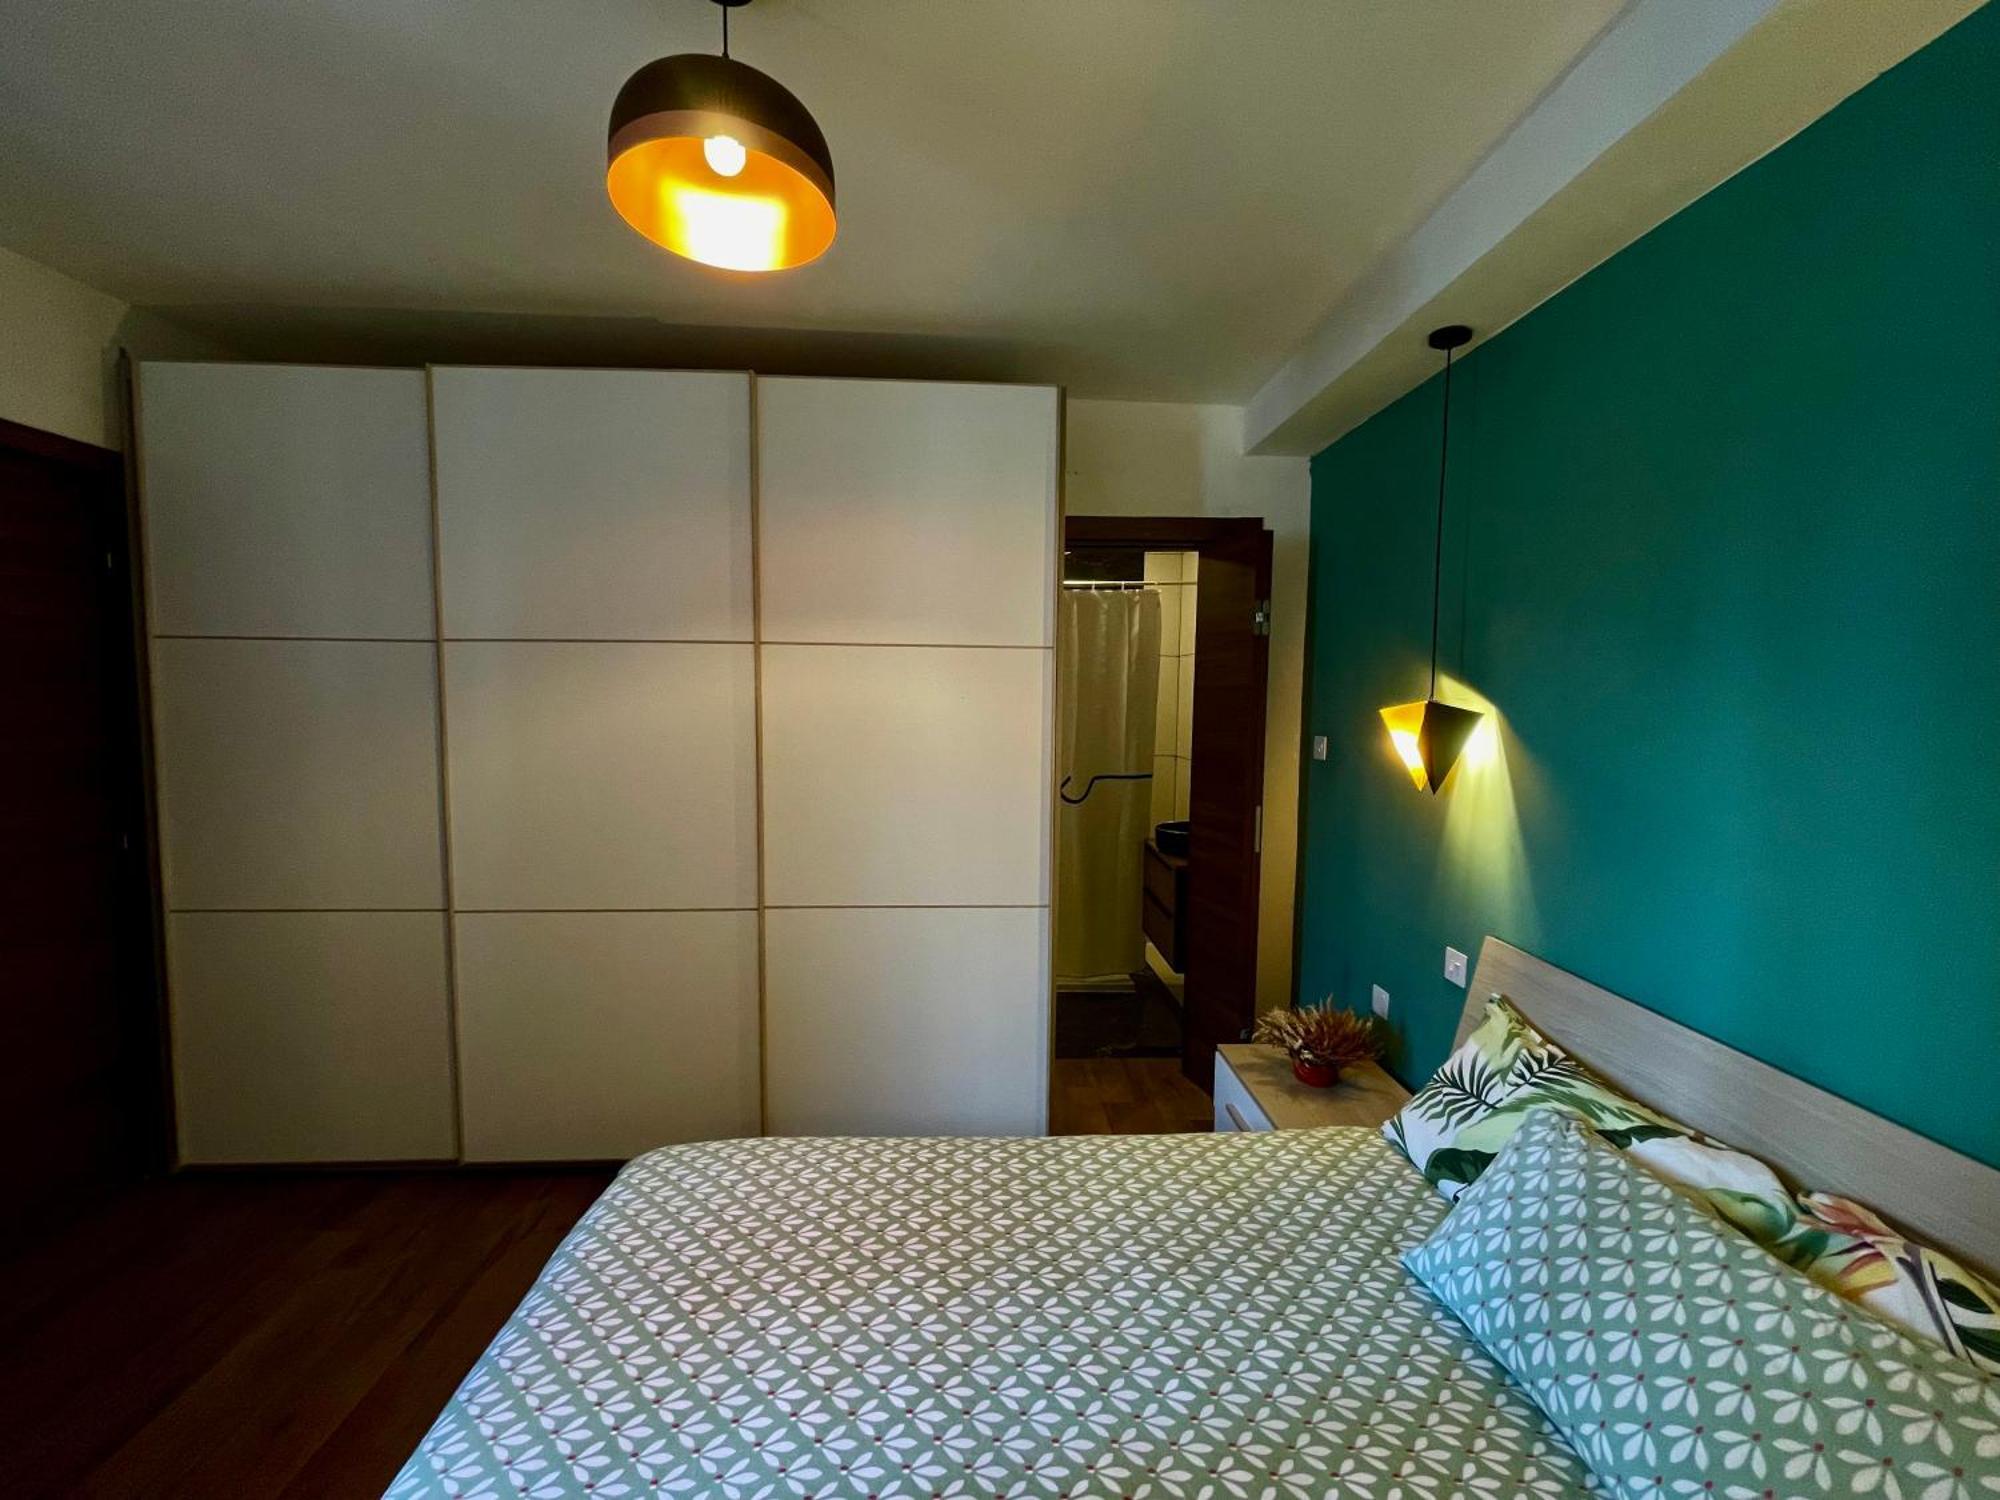 Airport Accommodation Bedroom With Your Own Private Bathroom Self Check In And Self Check Out Air-Condition Included Mqabba Εξωτερικό φωτογραφία